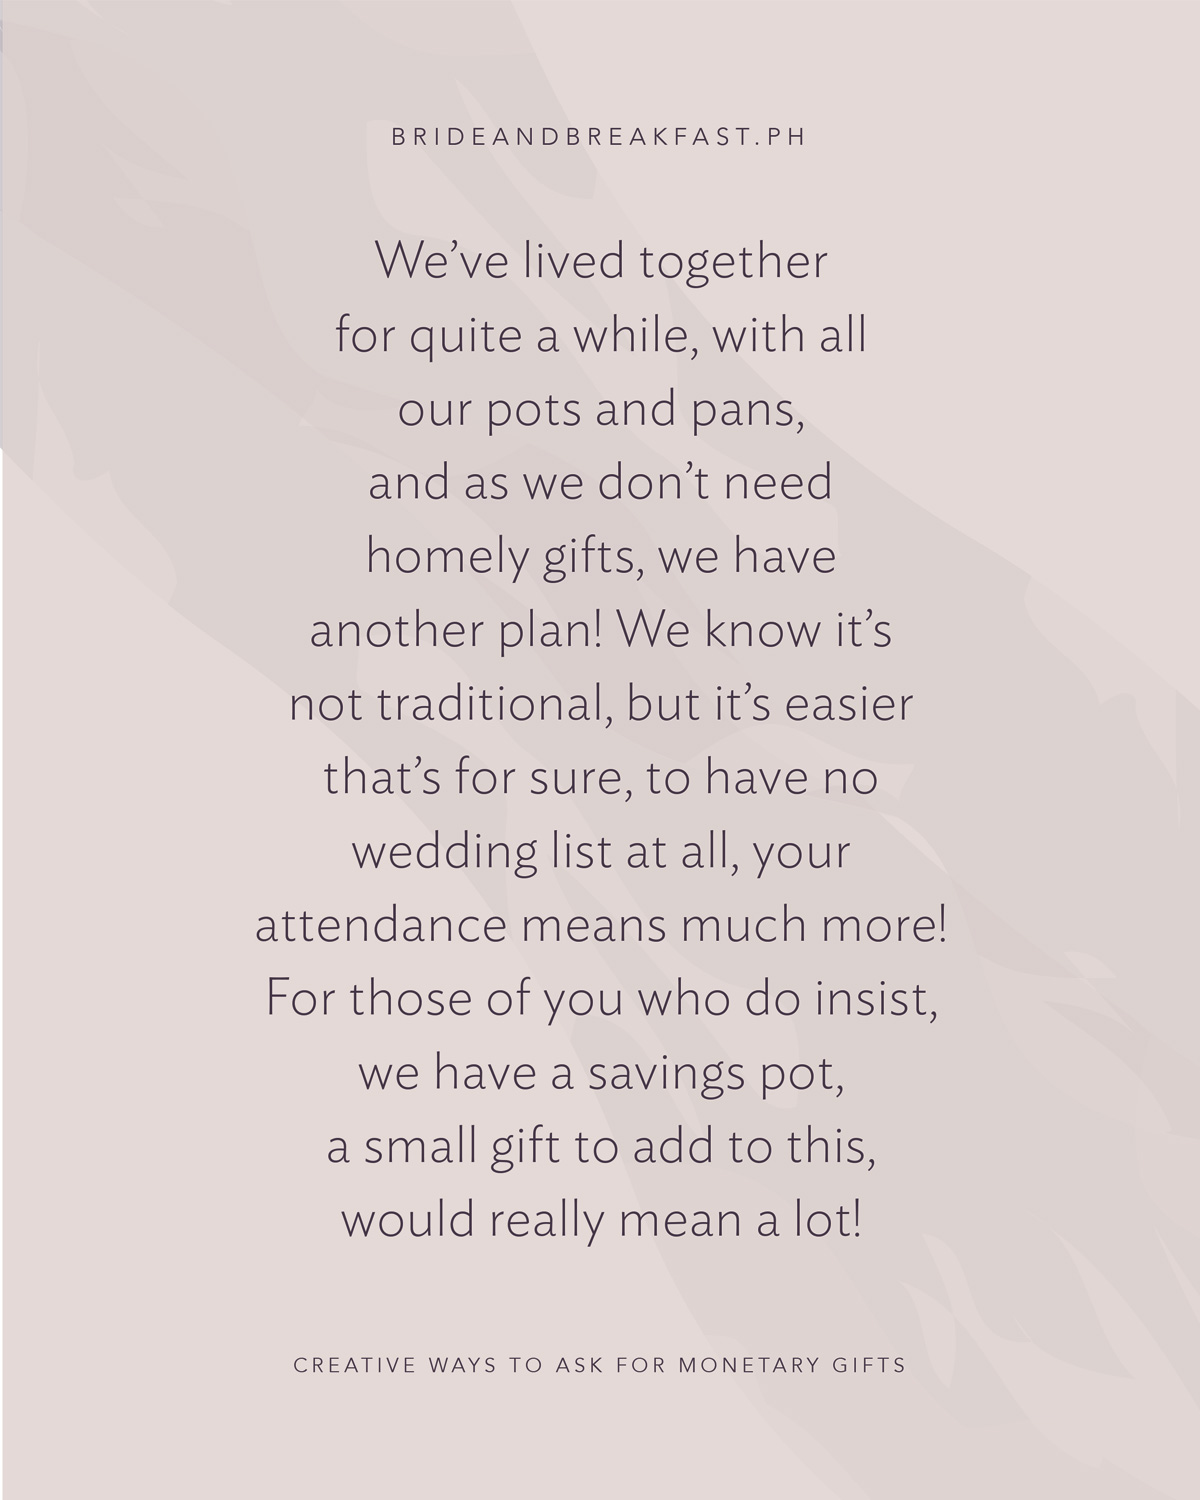 We’ve lived together for quite a while, With all our pots and pans, And as we don’t need homely gifts, We have another plan! We know it’s not traditional, But it’s easier that’s for sure, To have no wedding list at all, Your attendance means much more! For those of you who do insist, We have a savings pot, A small gift to add to this, Would really mean a lot!